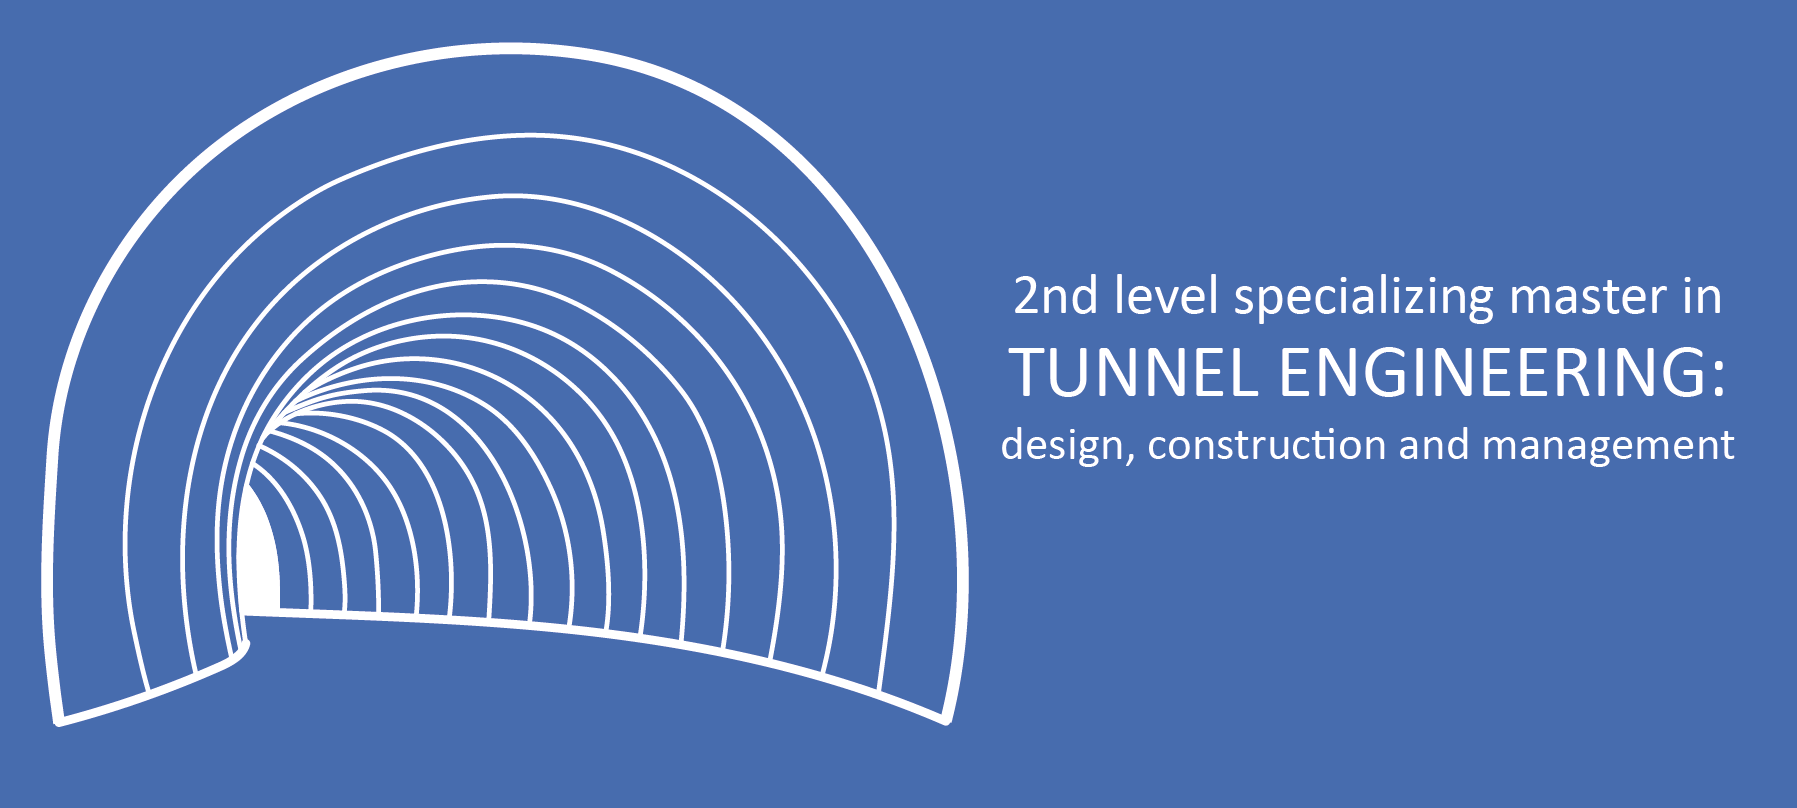 Master in Tunnel Engineering: design, construction and management